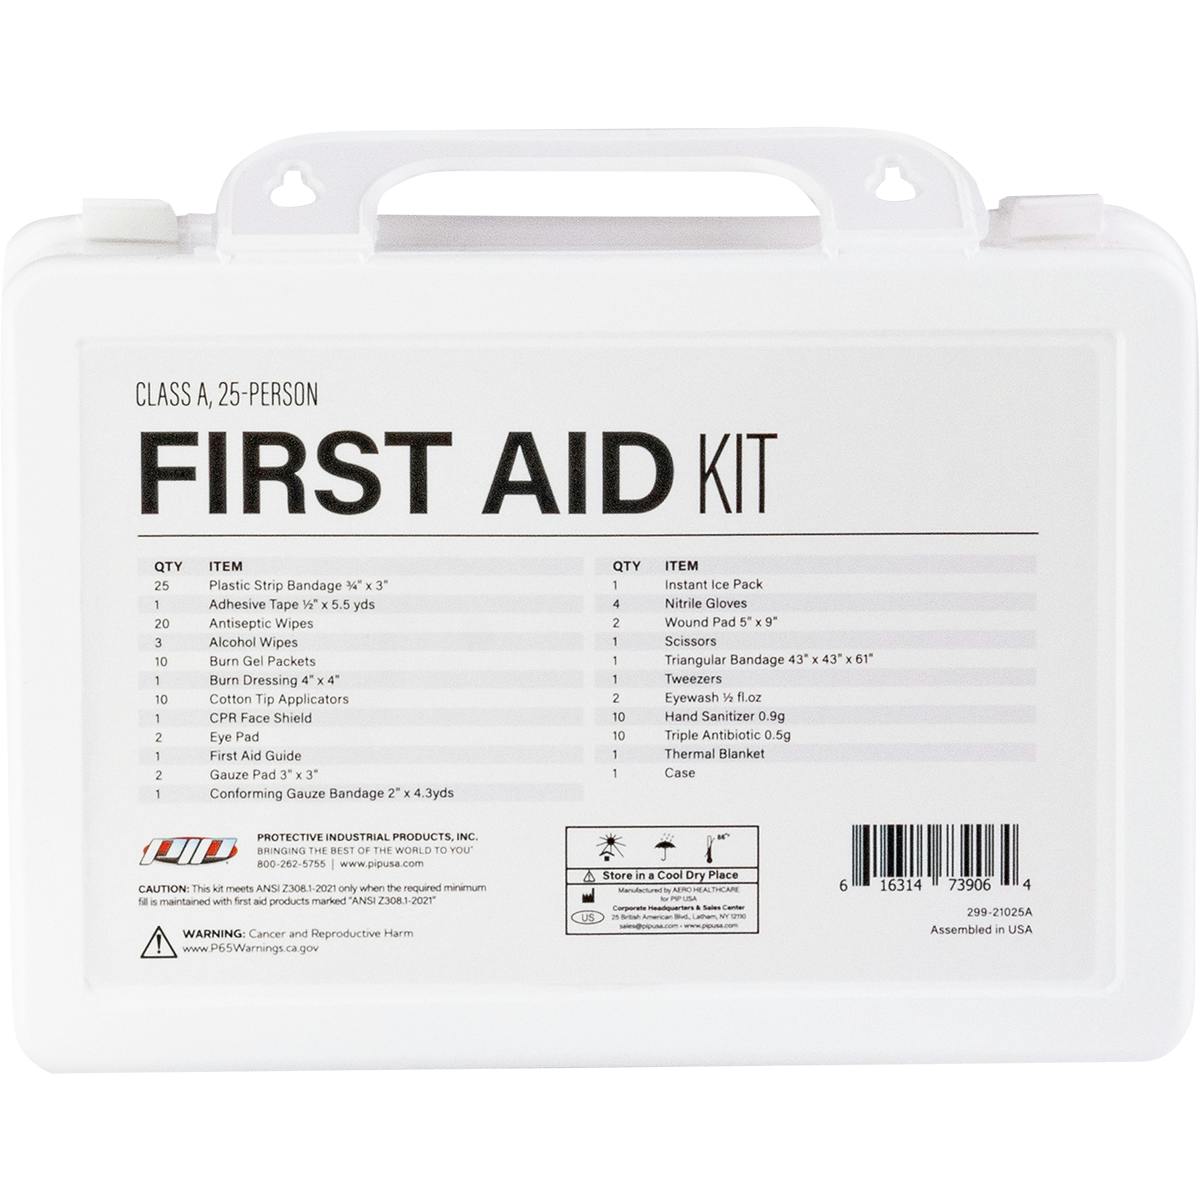 ANSI Class A Waterproof First Aid Kit - 25 Person, White (299-21025A) - KIT_0